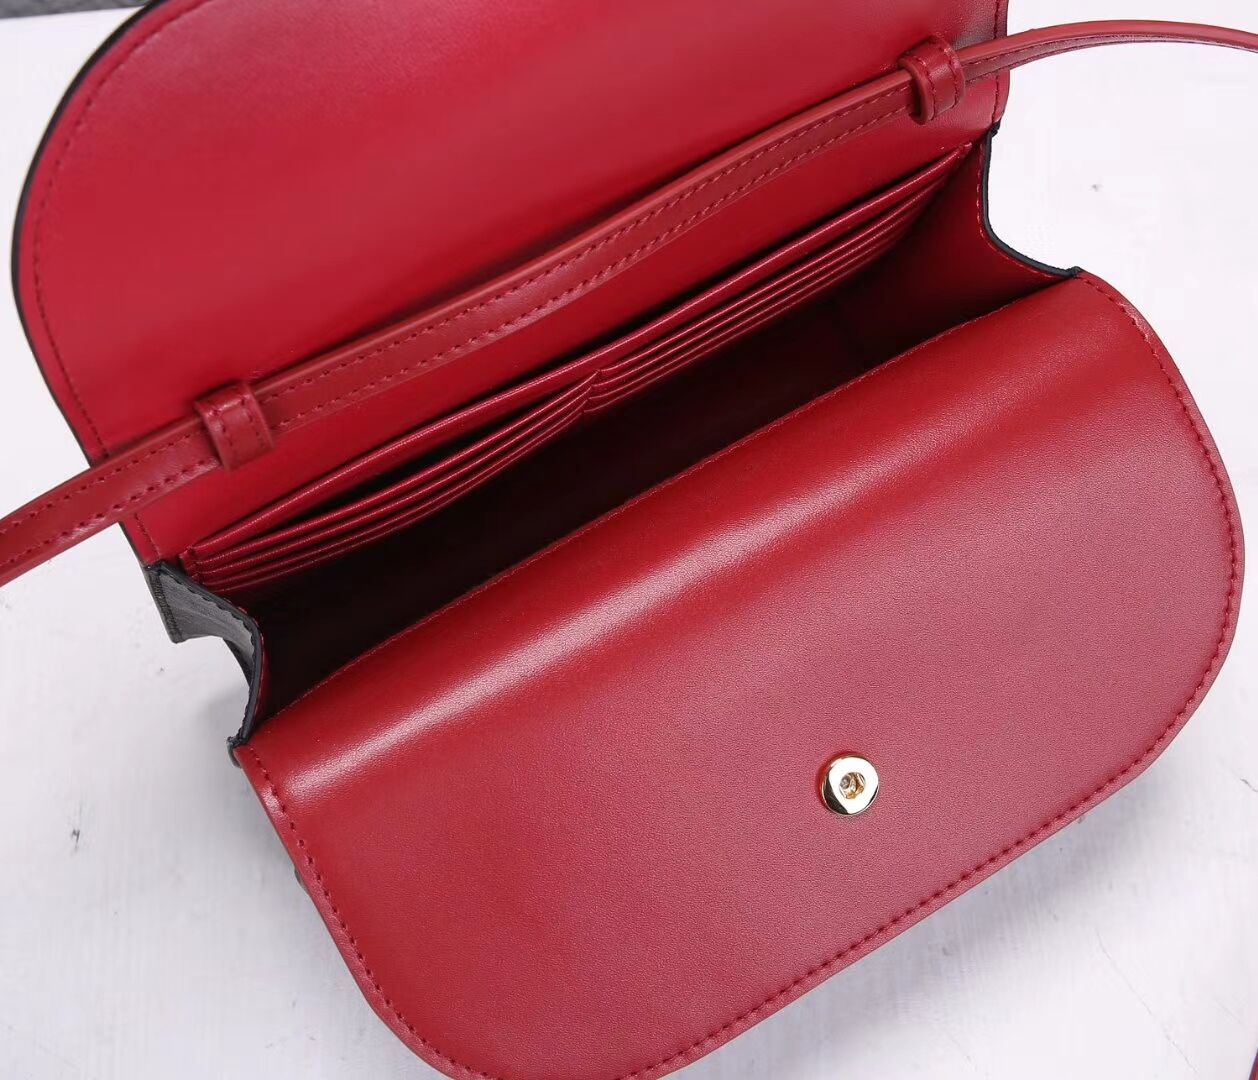 Celine COATED CANVAS CL00852 red